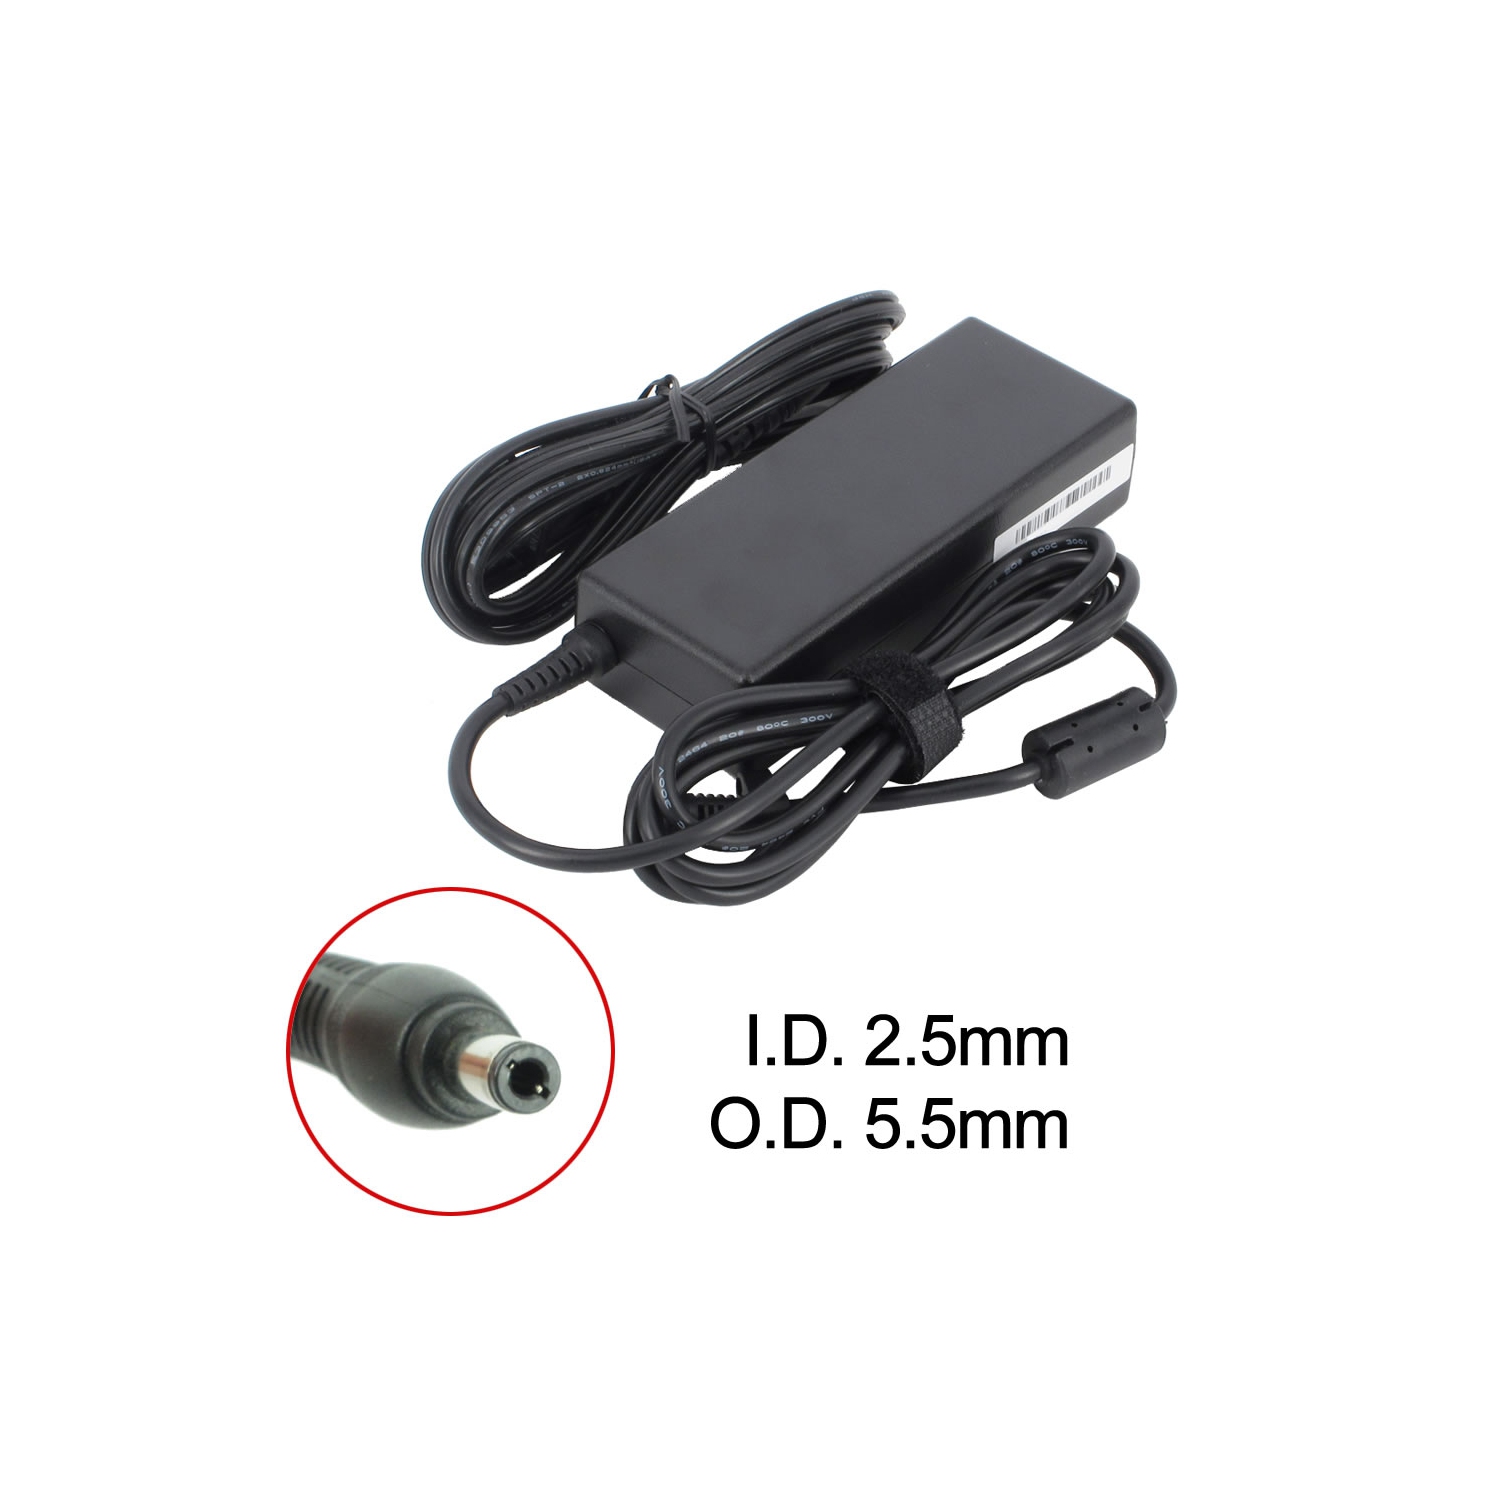 New Laptop AC Adapter for Toshiba Satellite Pro C50-A, 105395, ACE83-110093-2100, 6506083, LSE0220A1990, FPCAC62W, VPRN-AC100